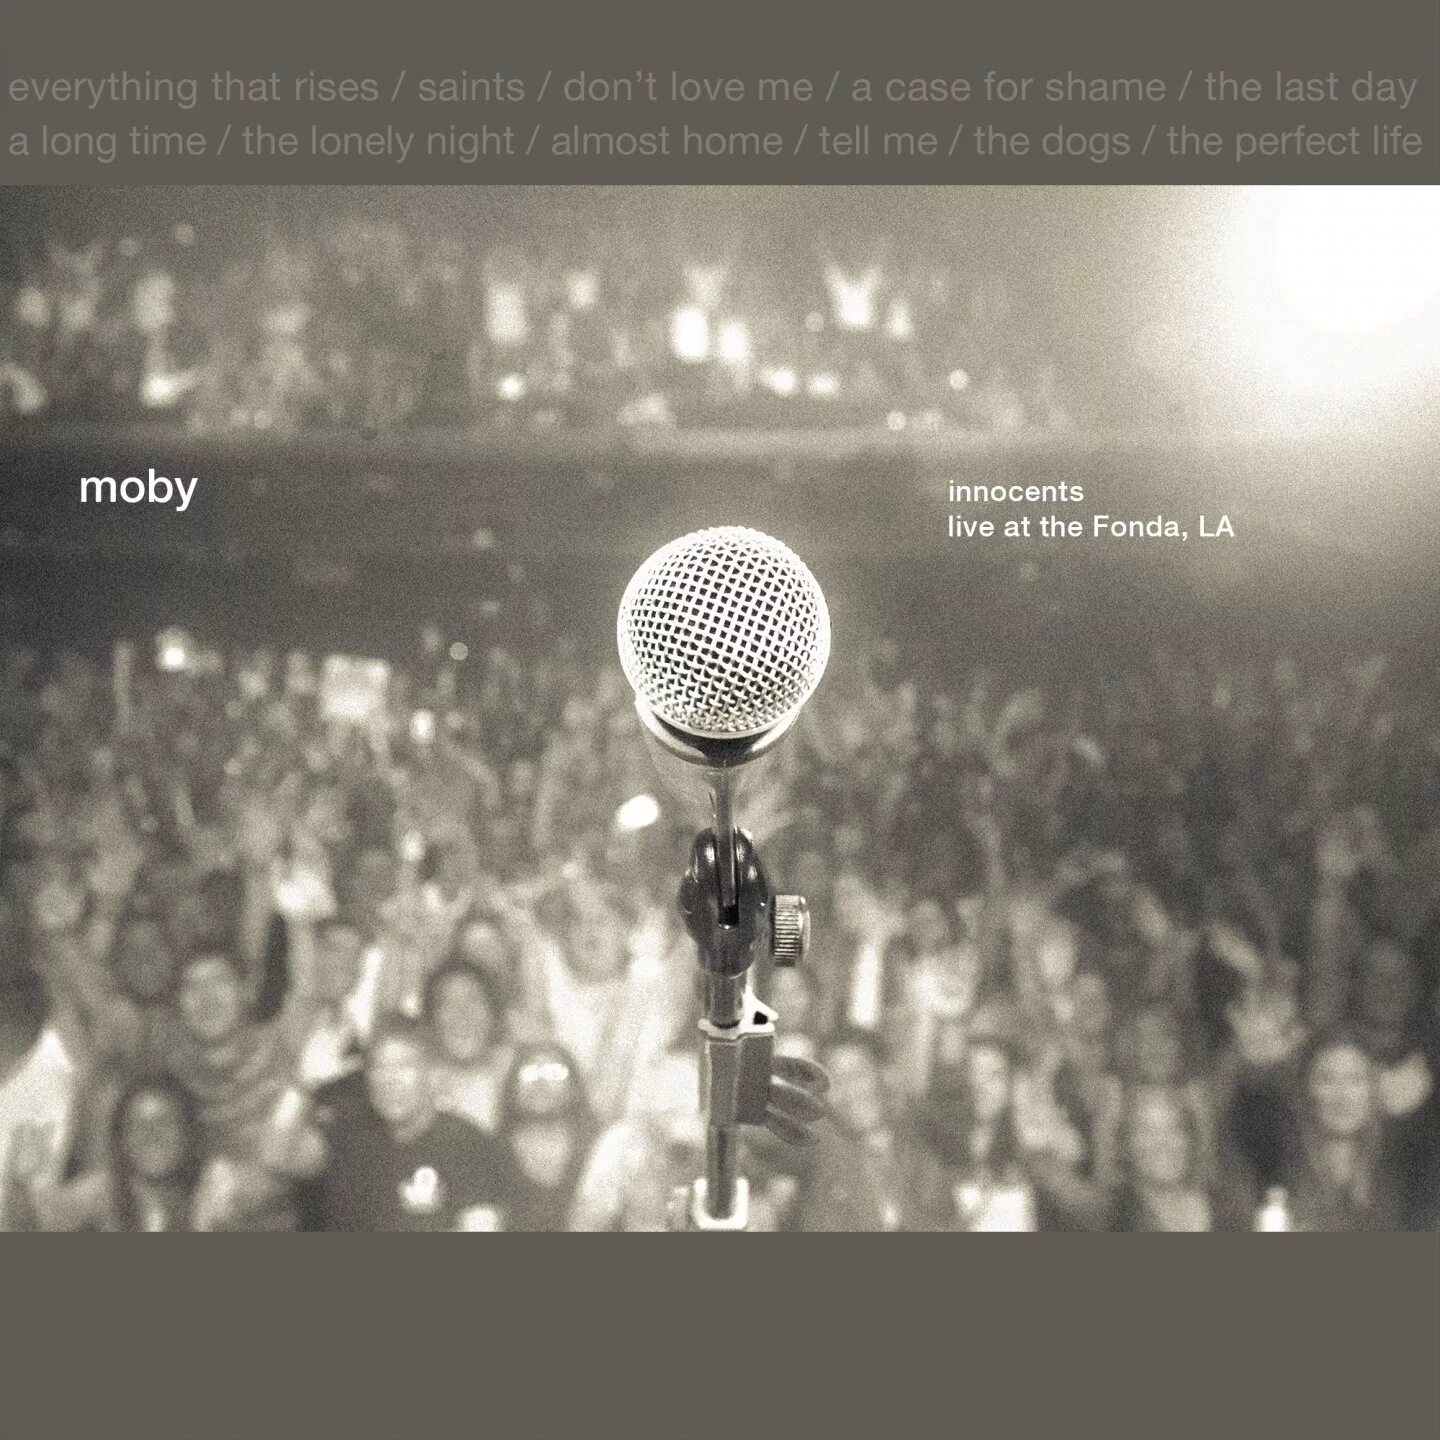 Moby Reprise 2021. Моби альбомы. Reprise (Moby album). Moby innocents альбом. The last day moby перевод песни